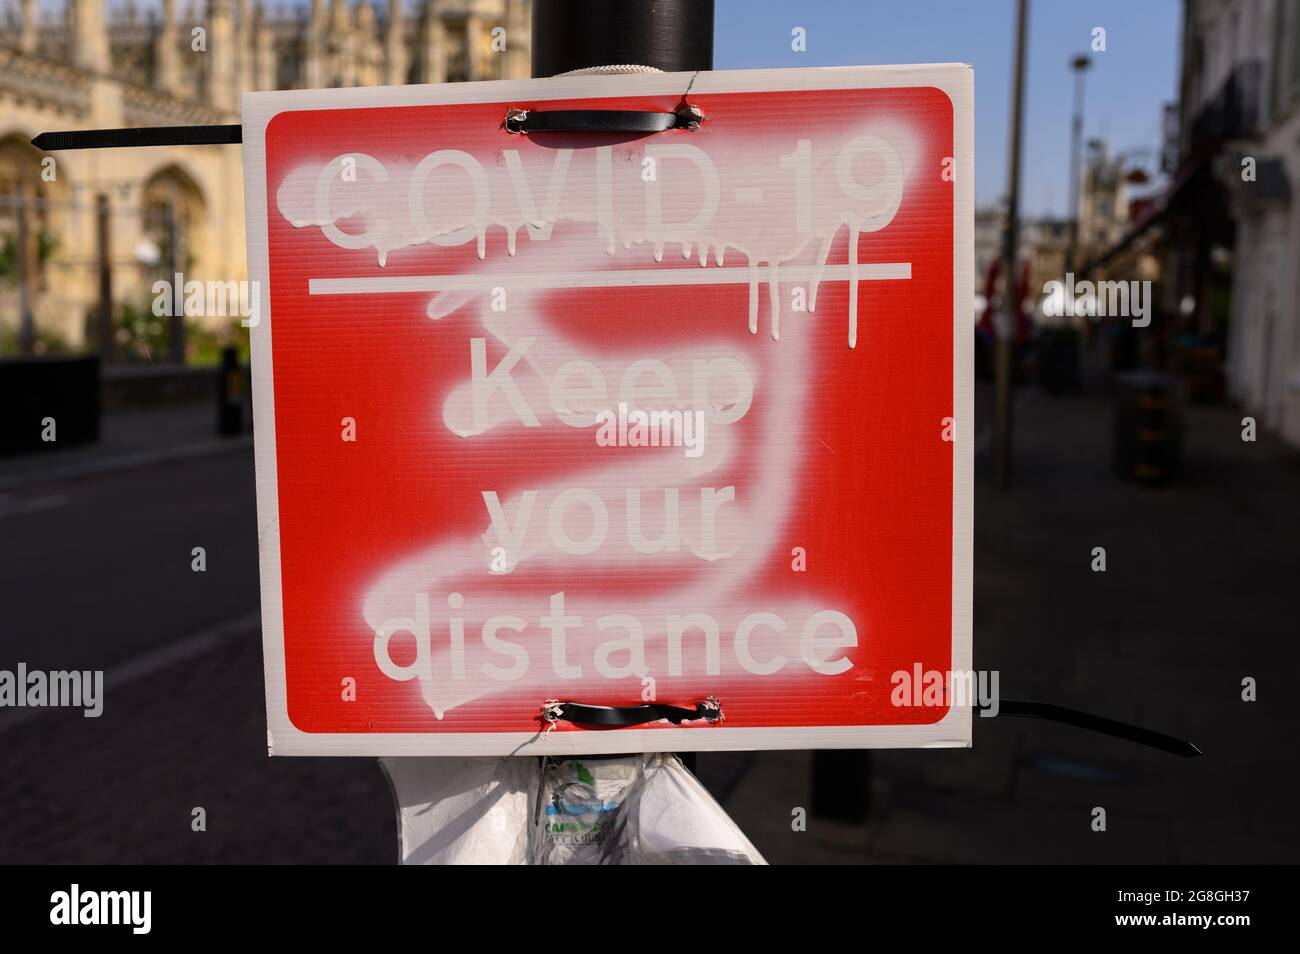 Defaced or vandalised COVID-19 social distancing sign. Stock Photo